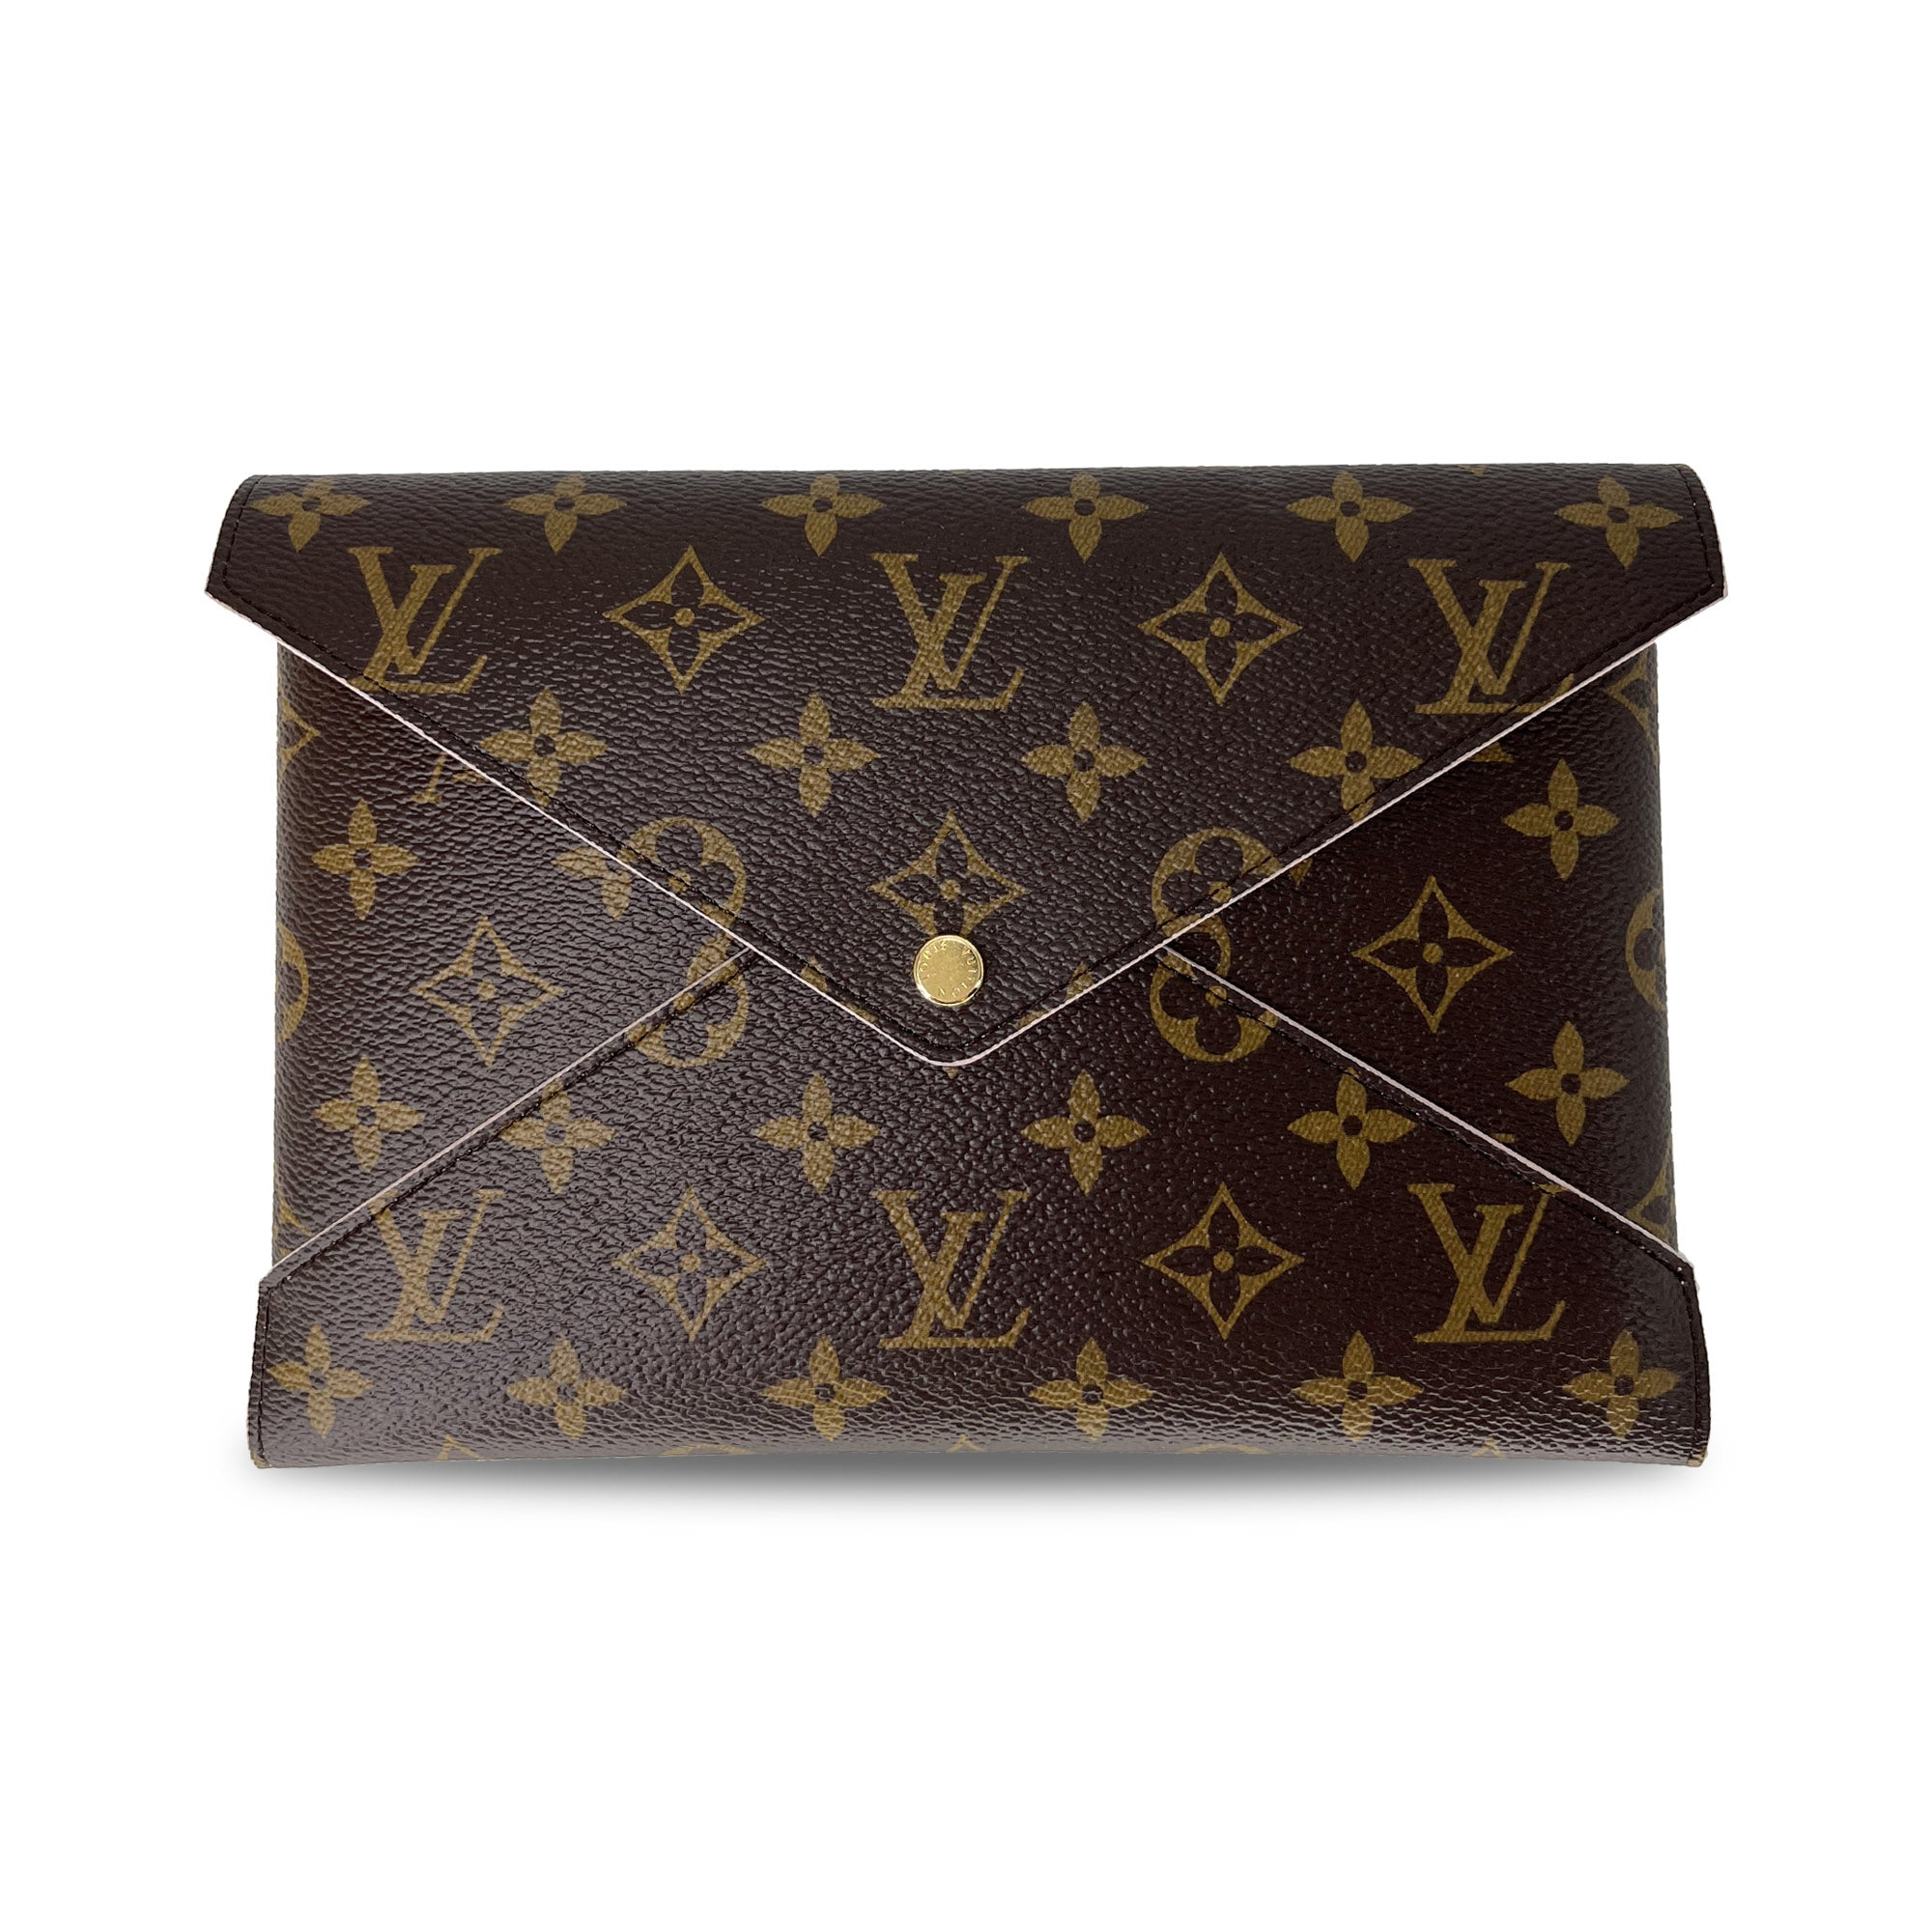 2022 Louis Vuitton Spring Limited Edition Kirigami Pochette 3 Envelope Bags!  New